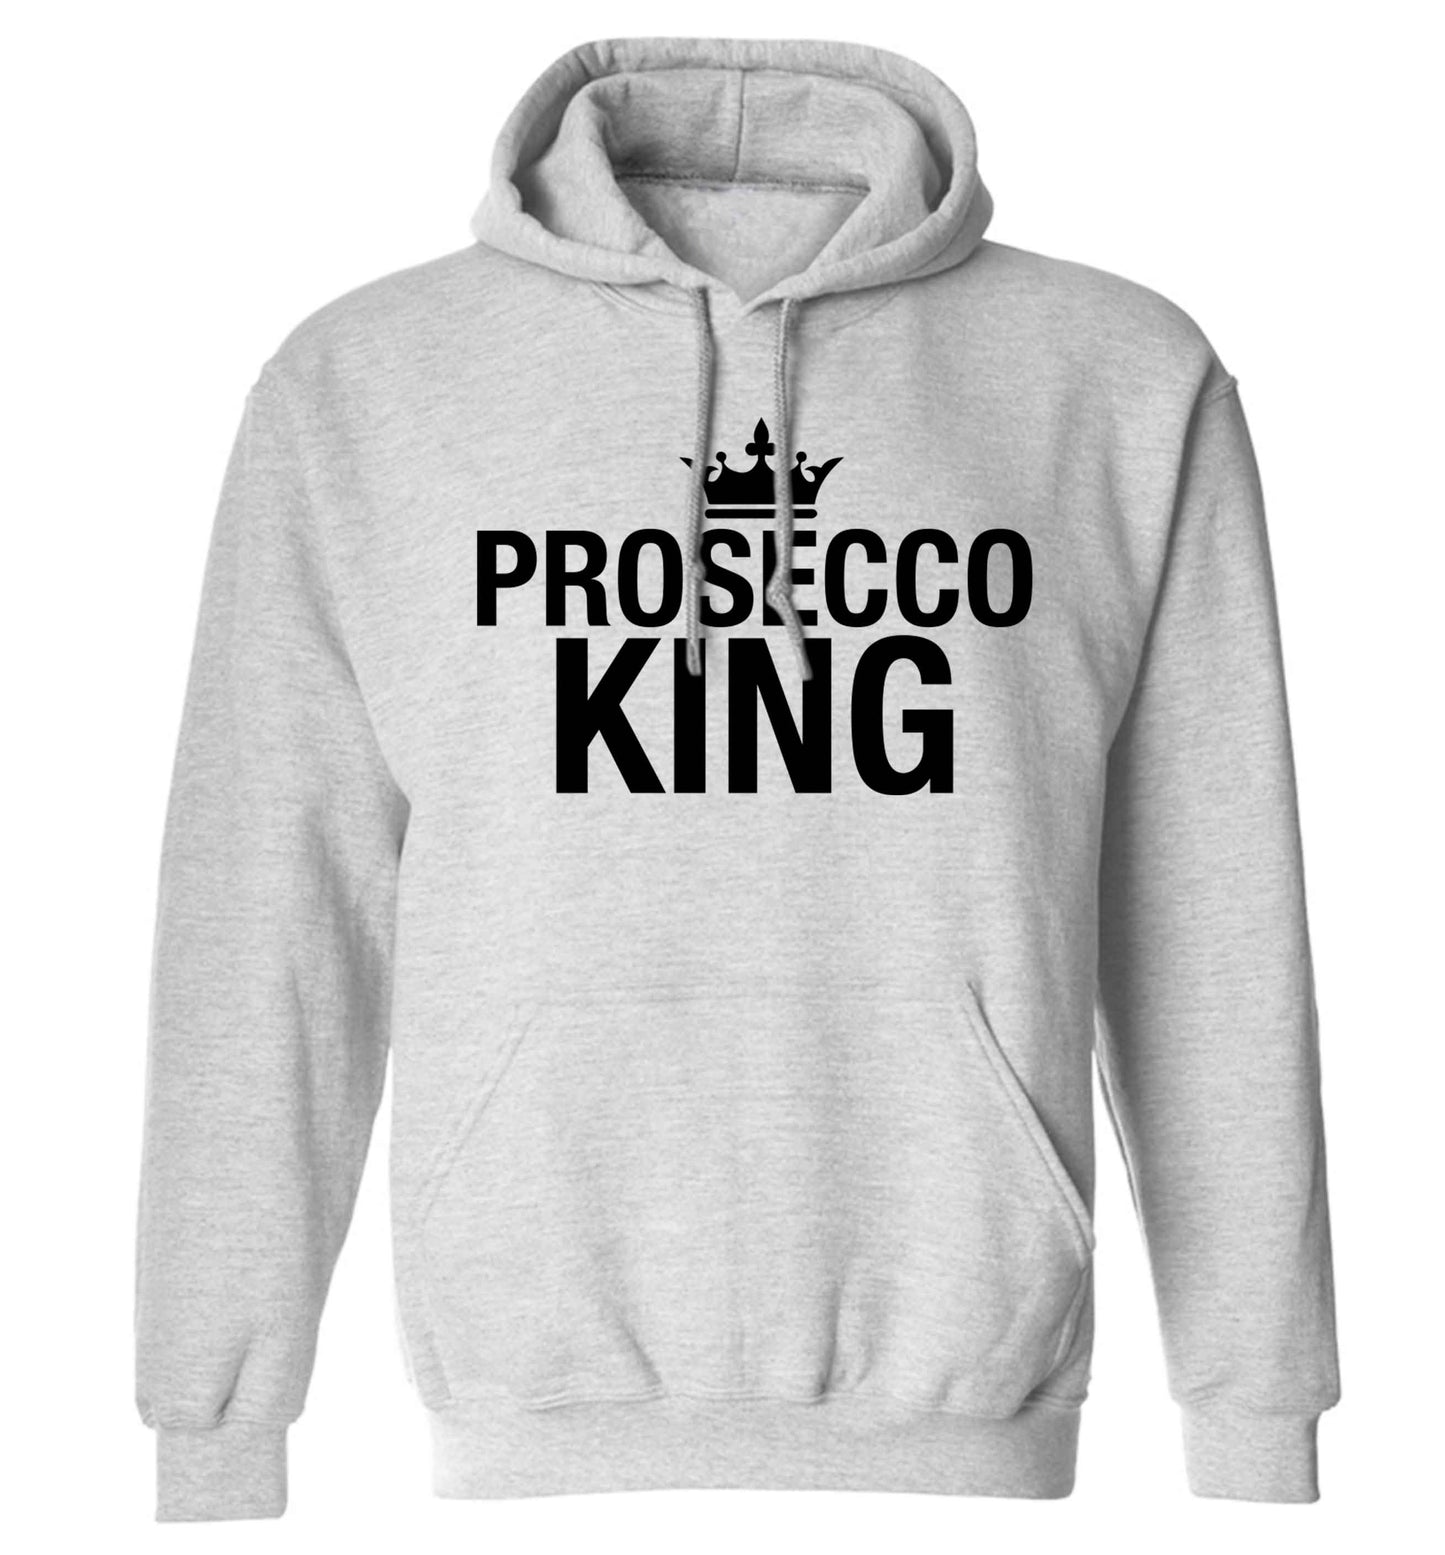 Prosecco king adults unisex grey hoodie 2XL